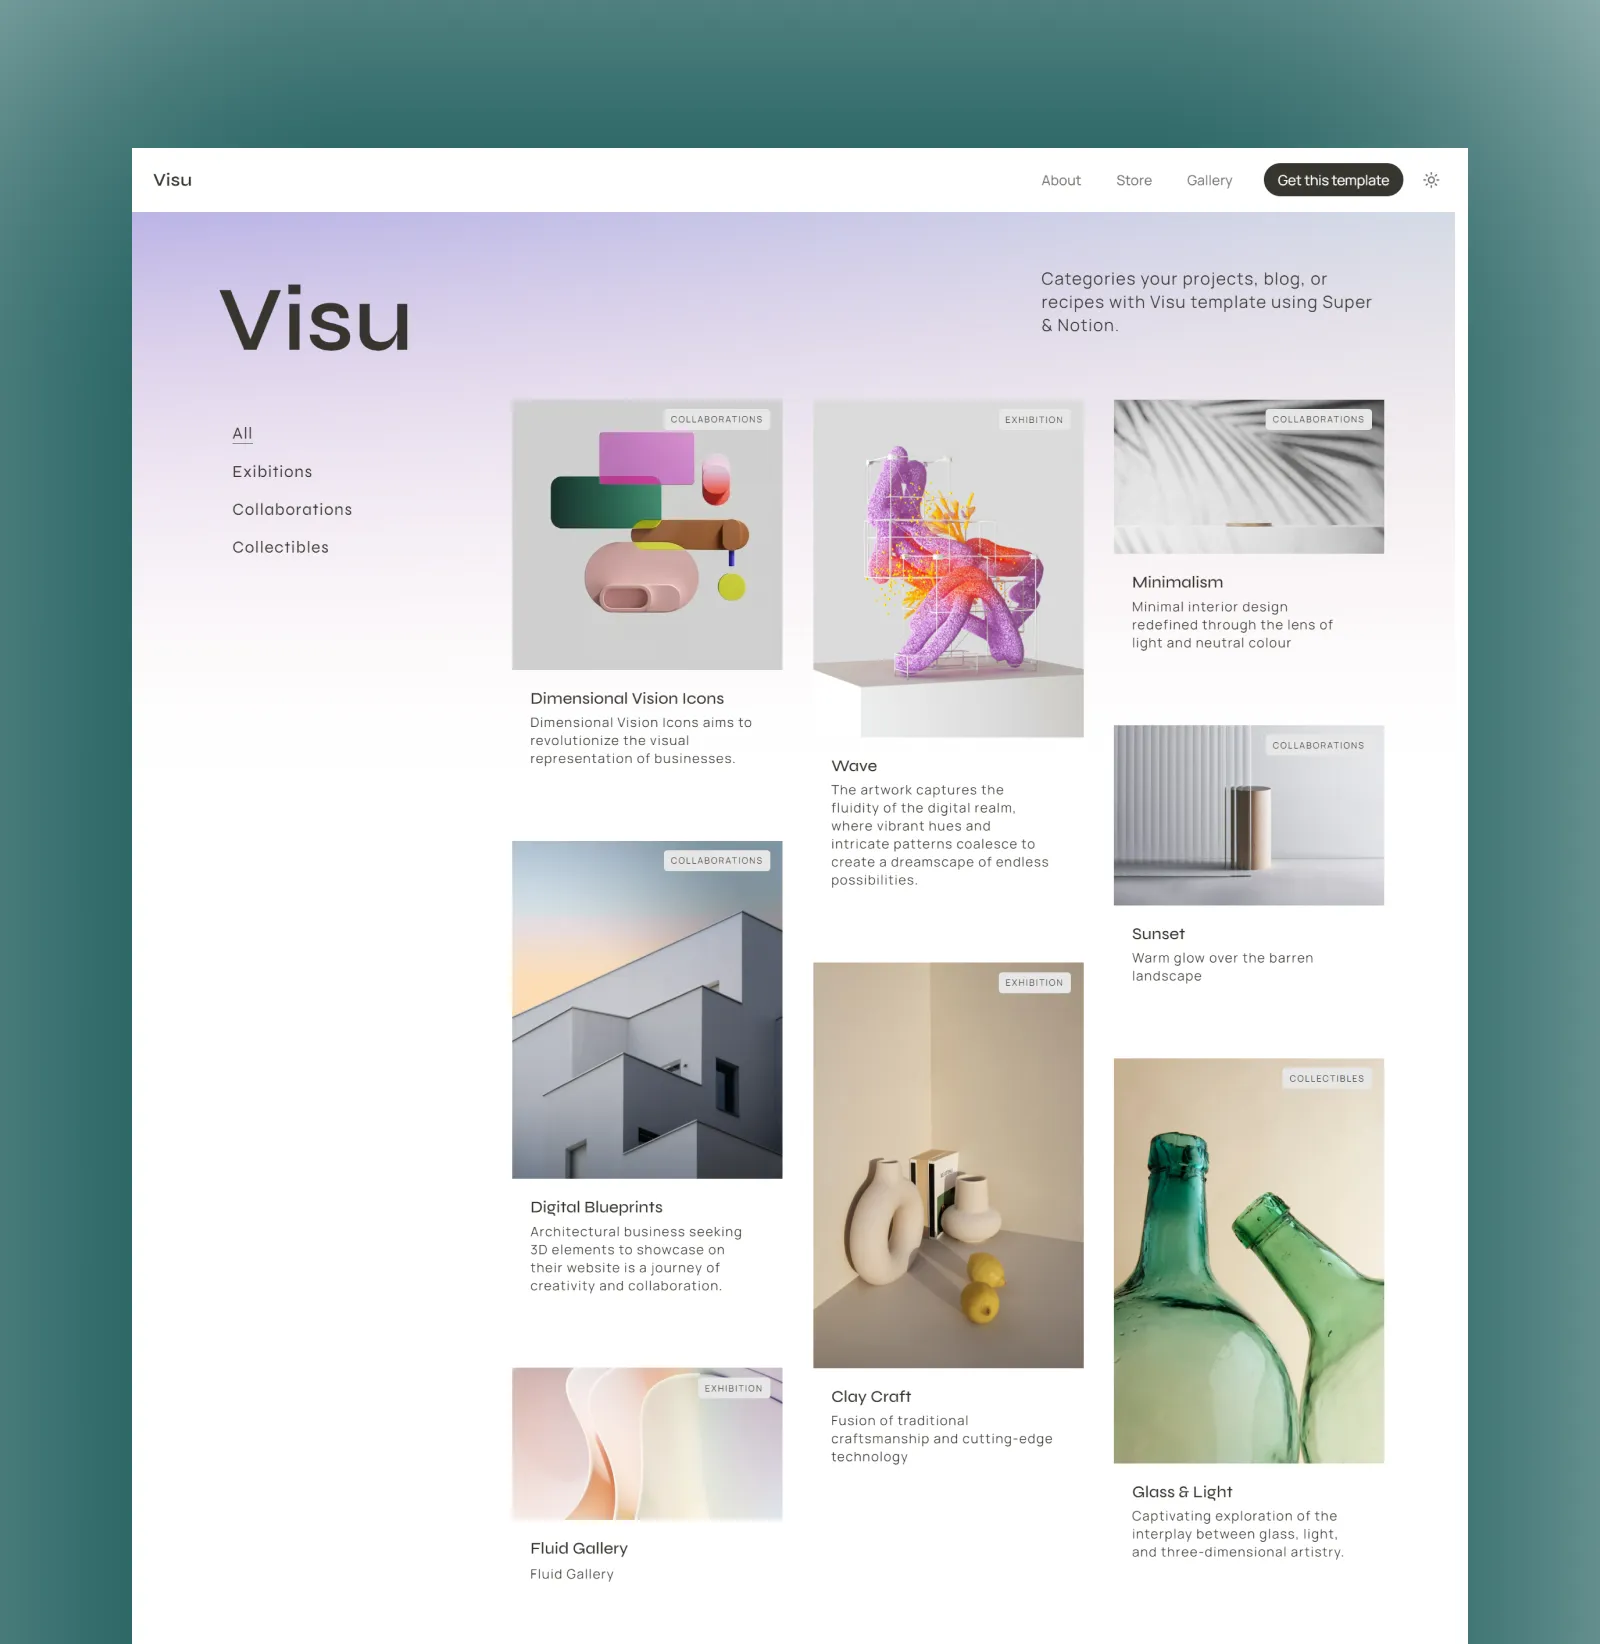 visu powered by Super and Notion